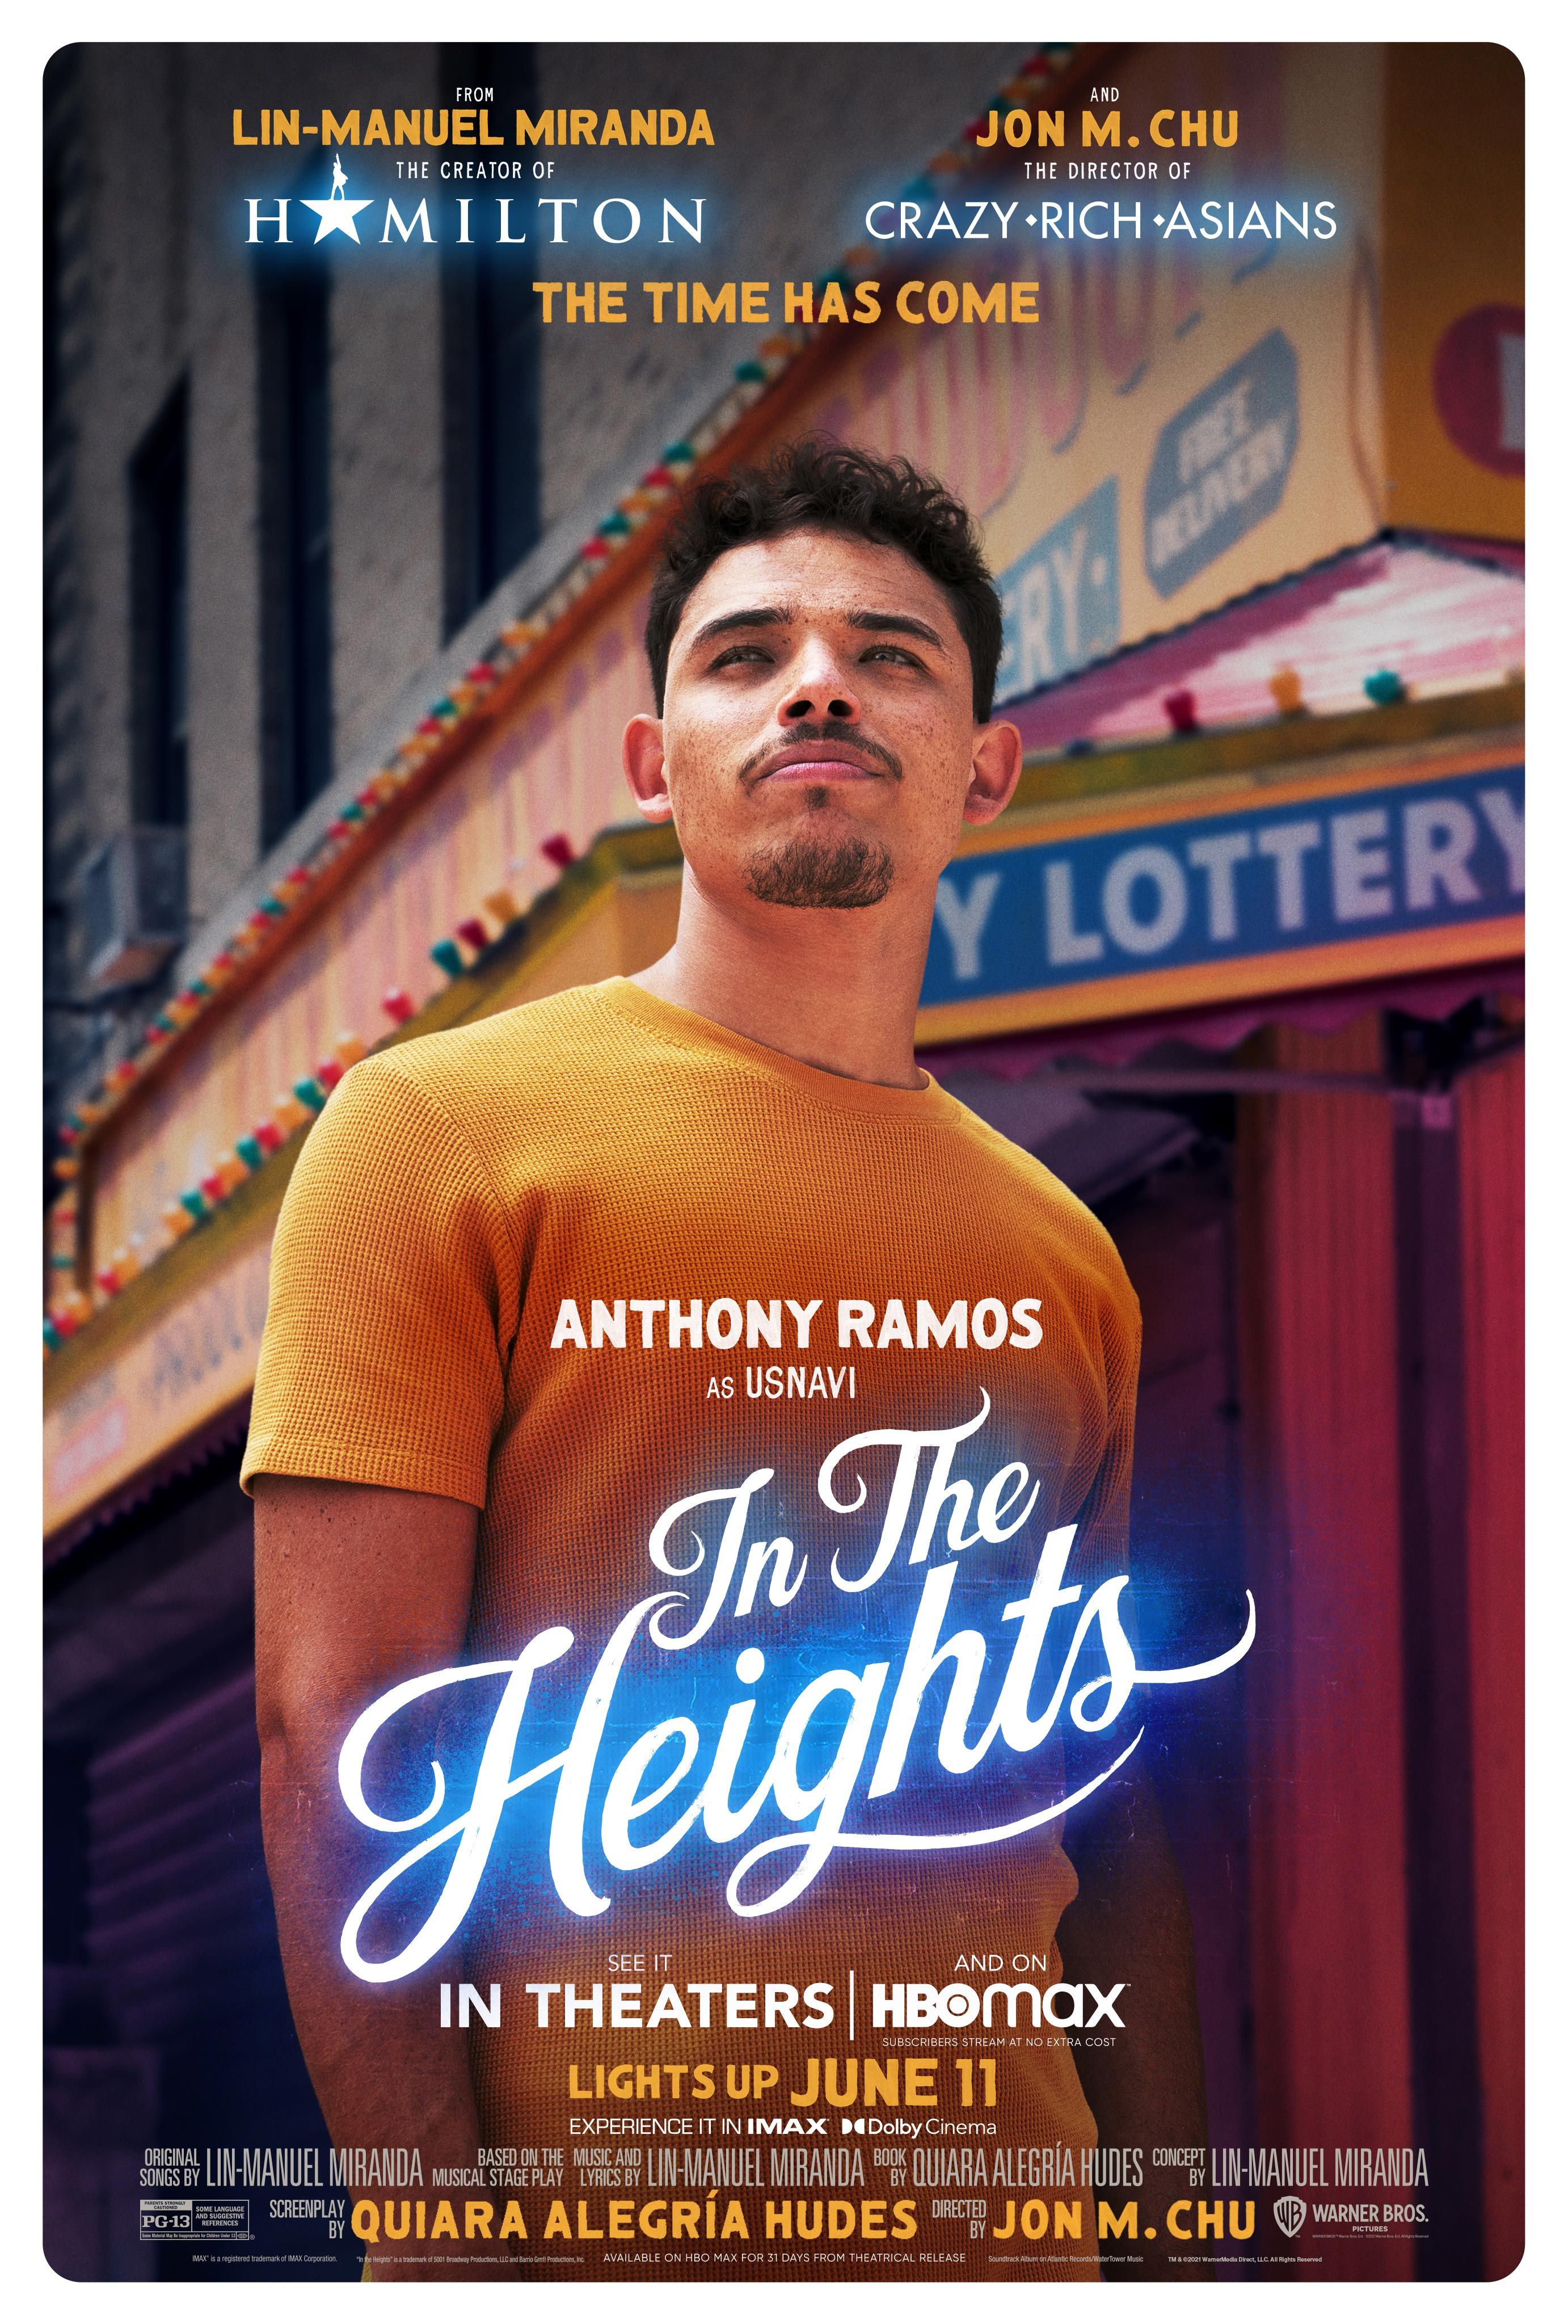 In The Heights Character Posters Give CloseUps Of Musical Cast Movie